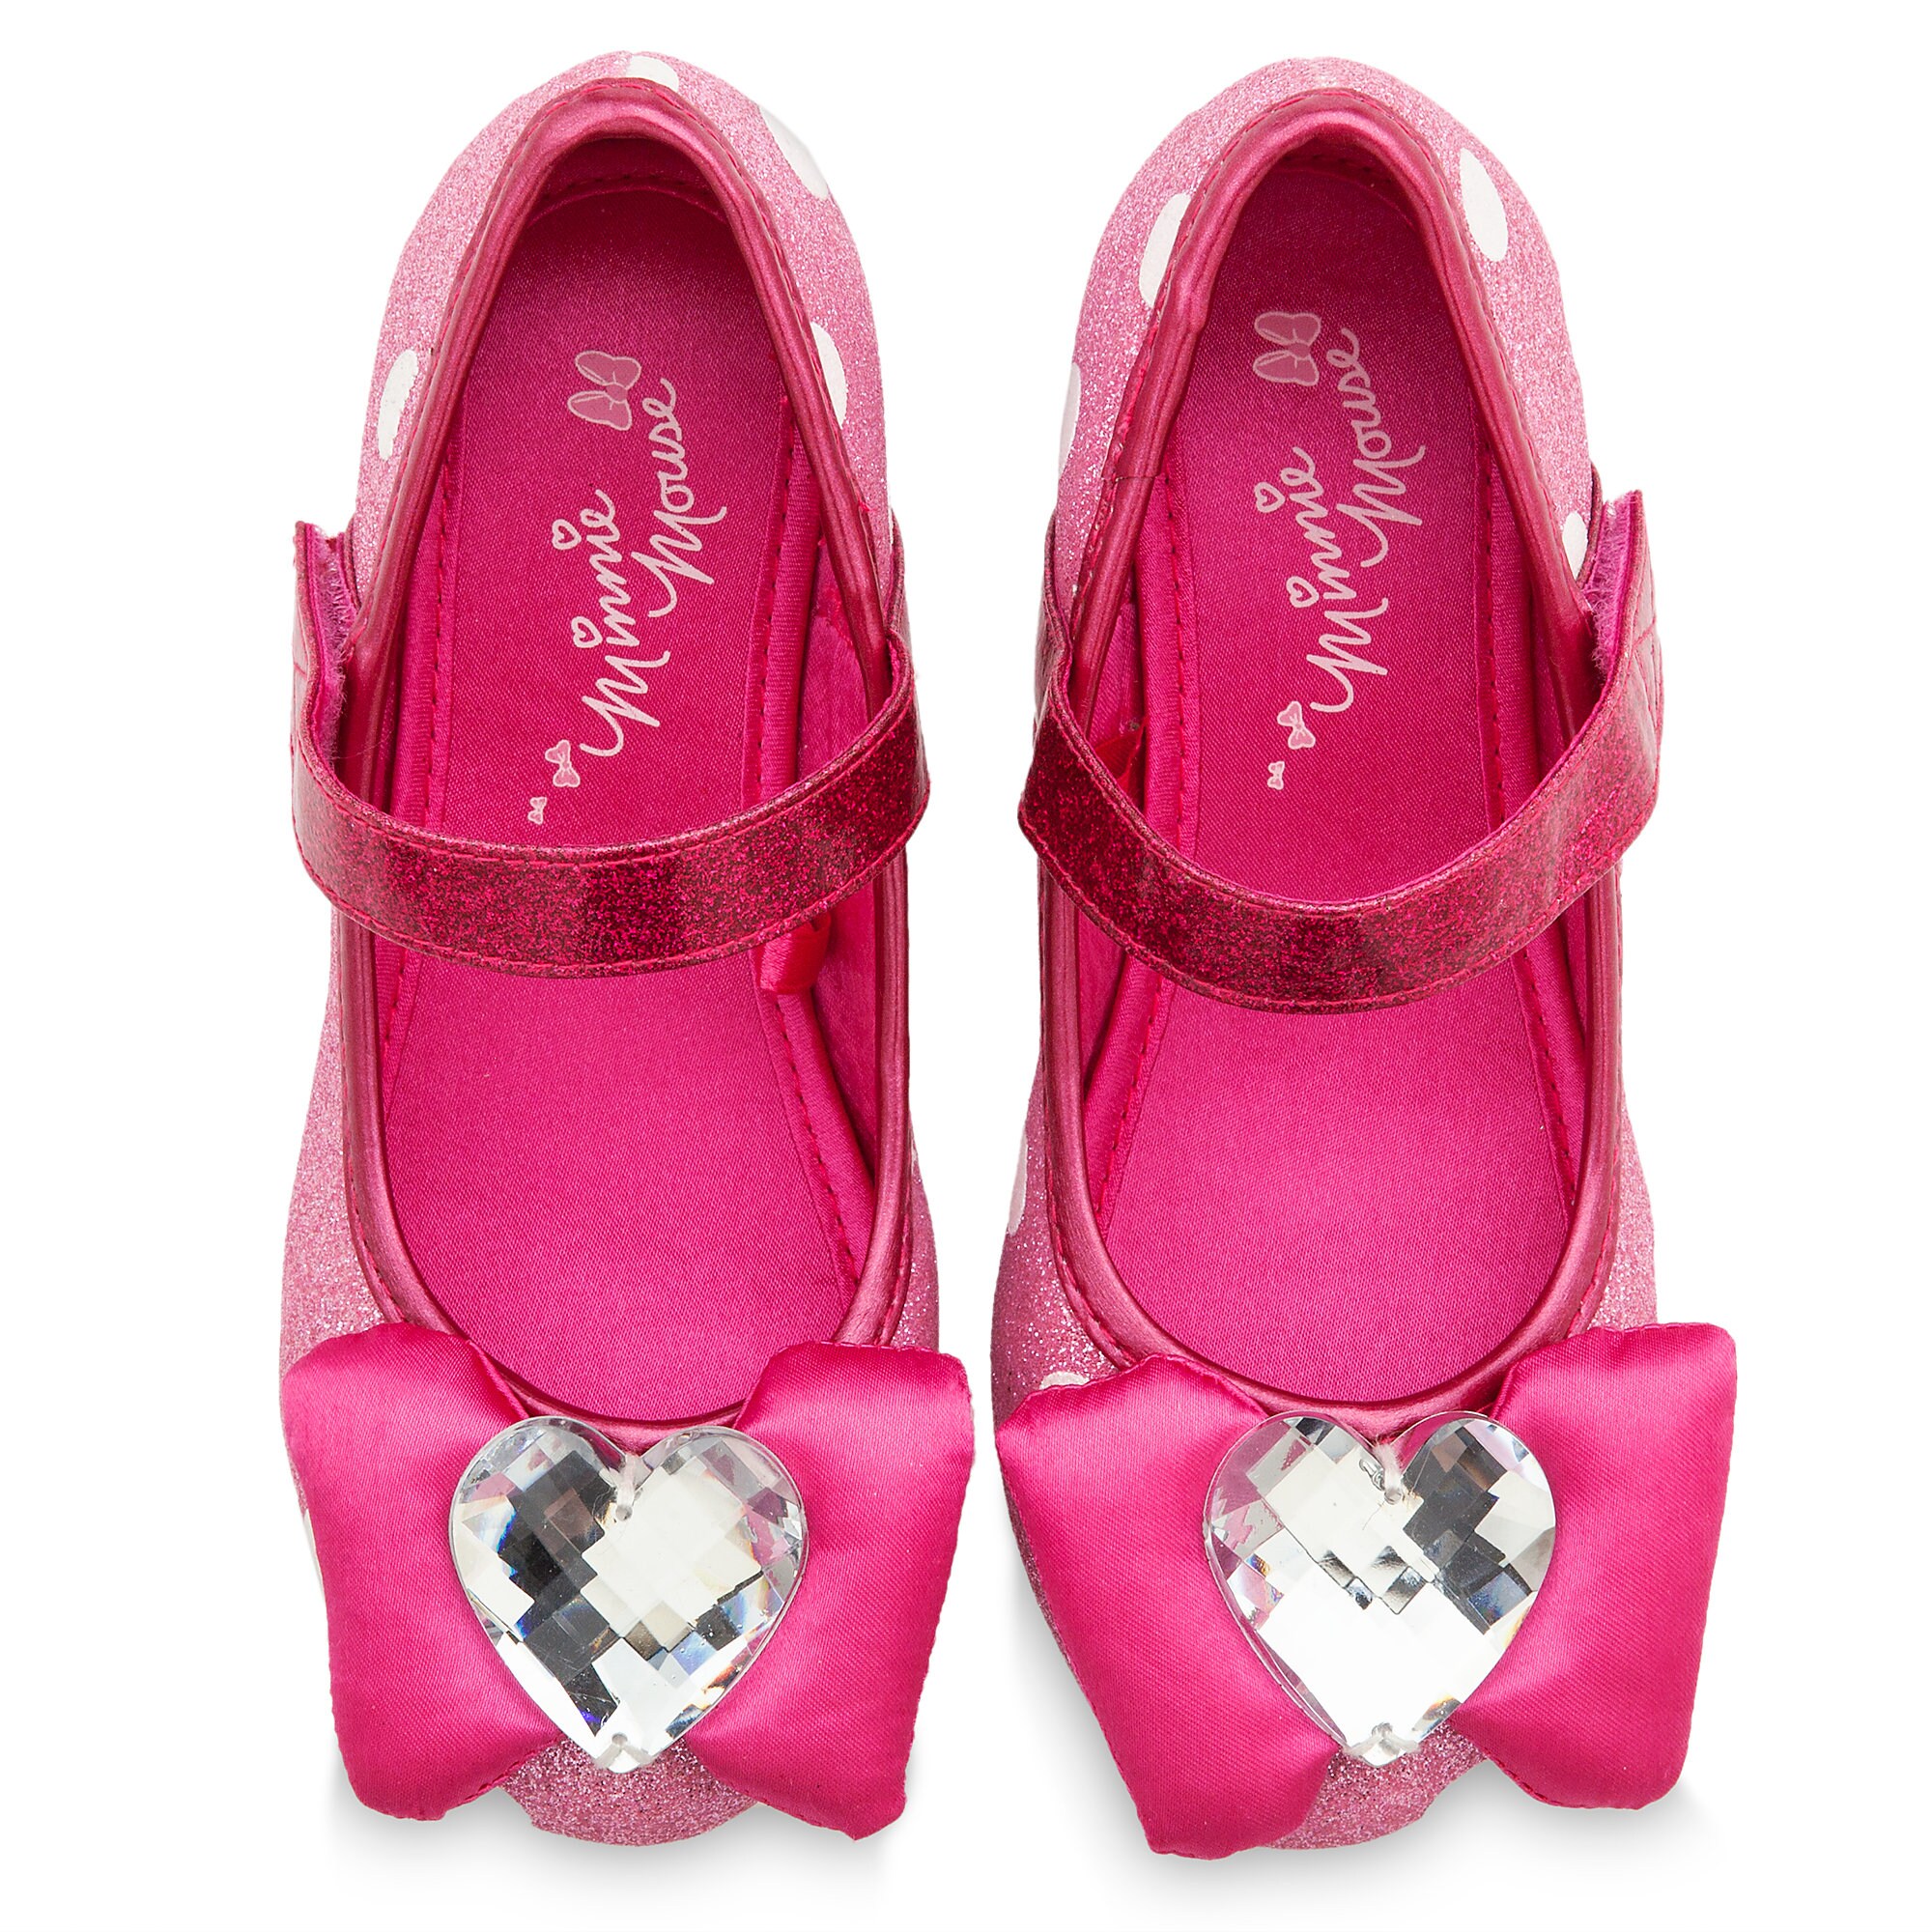 Minnie Mouse Costume Shoes for Kids - Pink